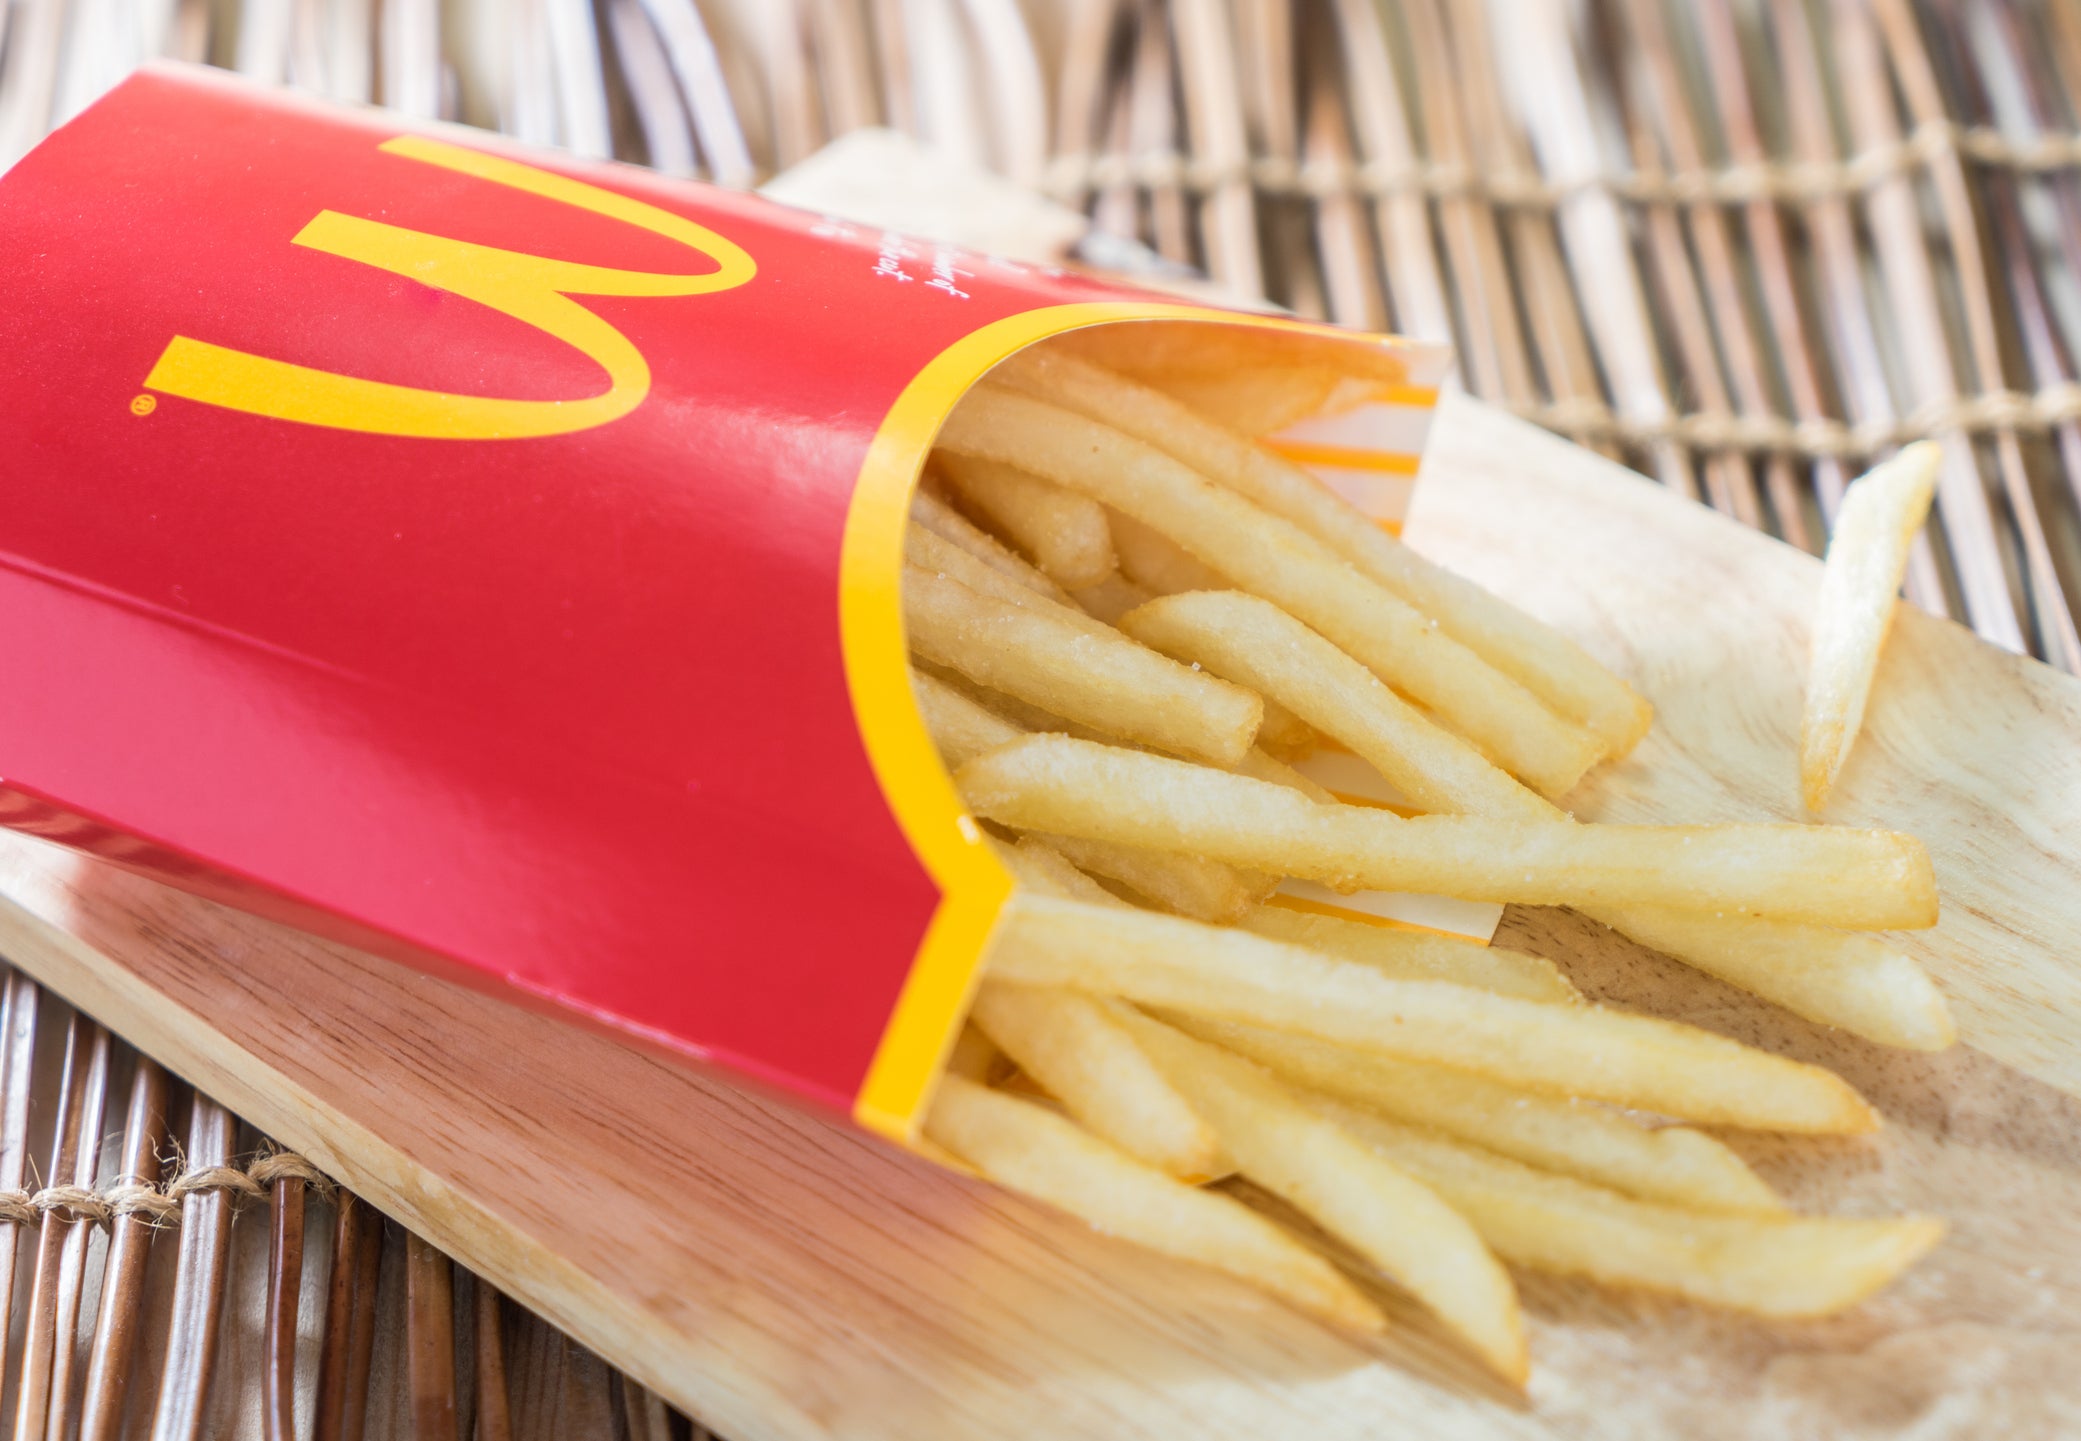 McDonald’s app users will be offered complimentary fries every Friday for the rest of the year with a $1 purchase